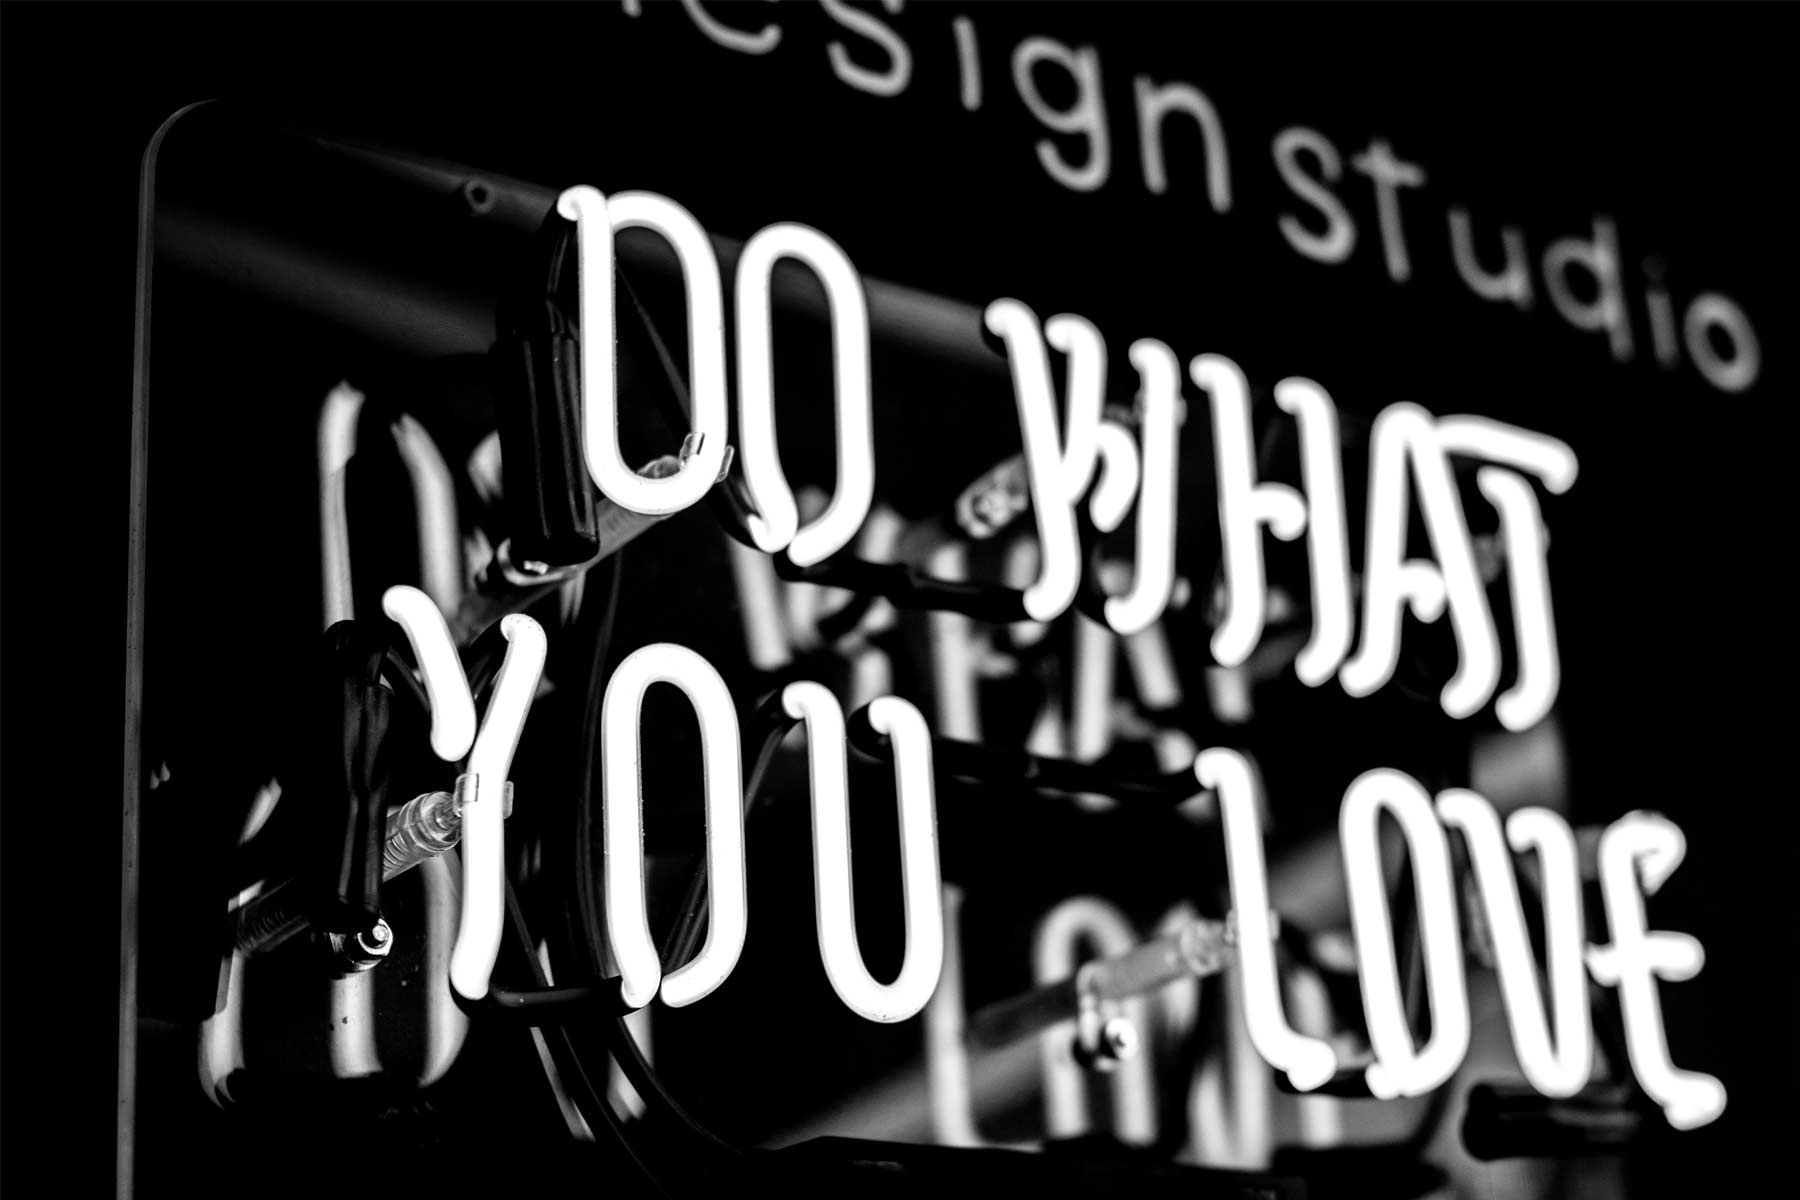 Neon sign says "do what you love"